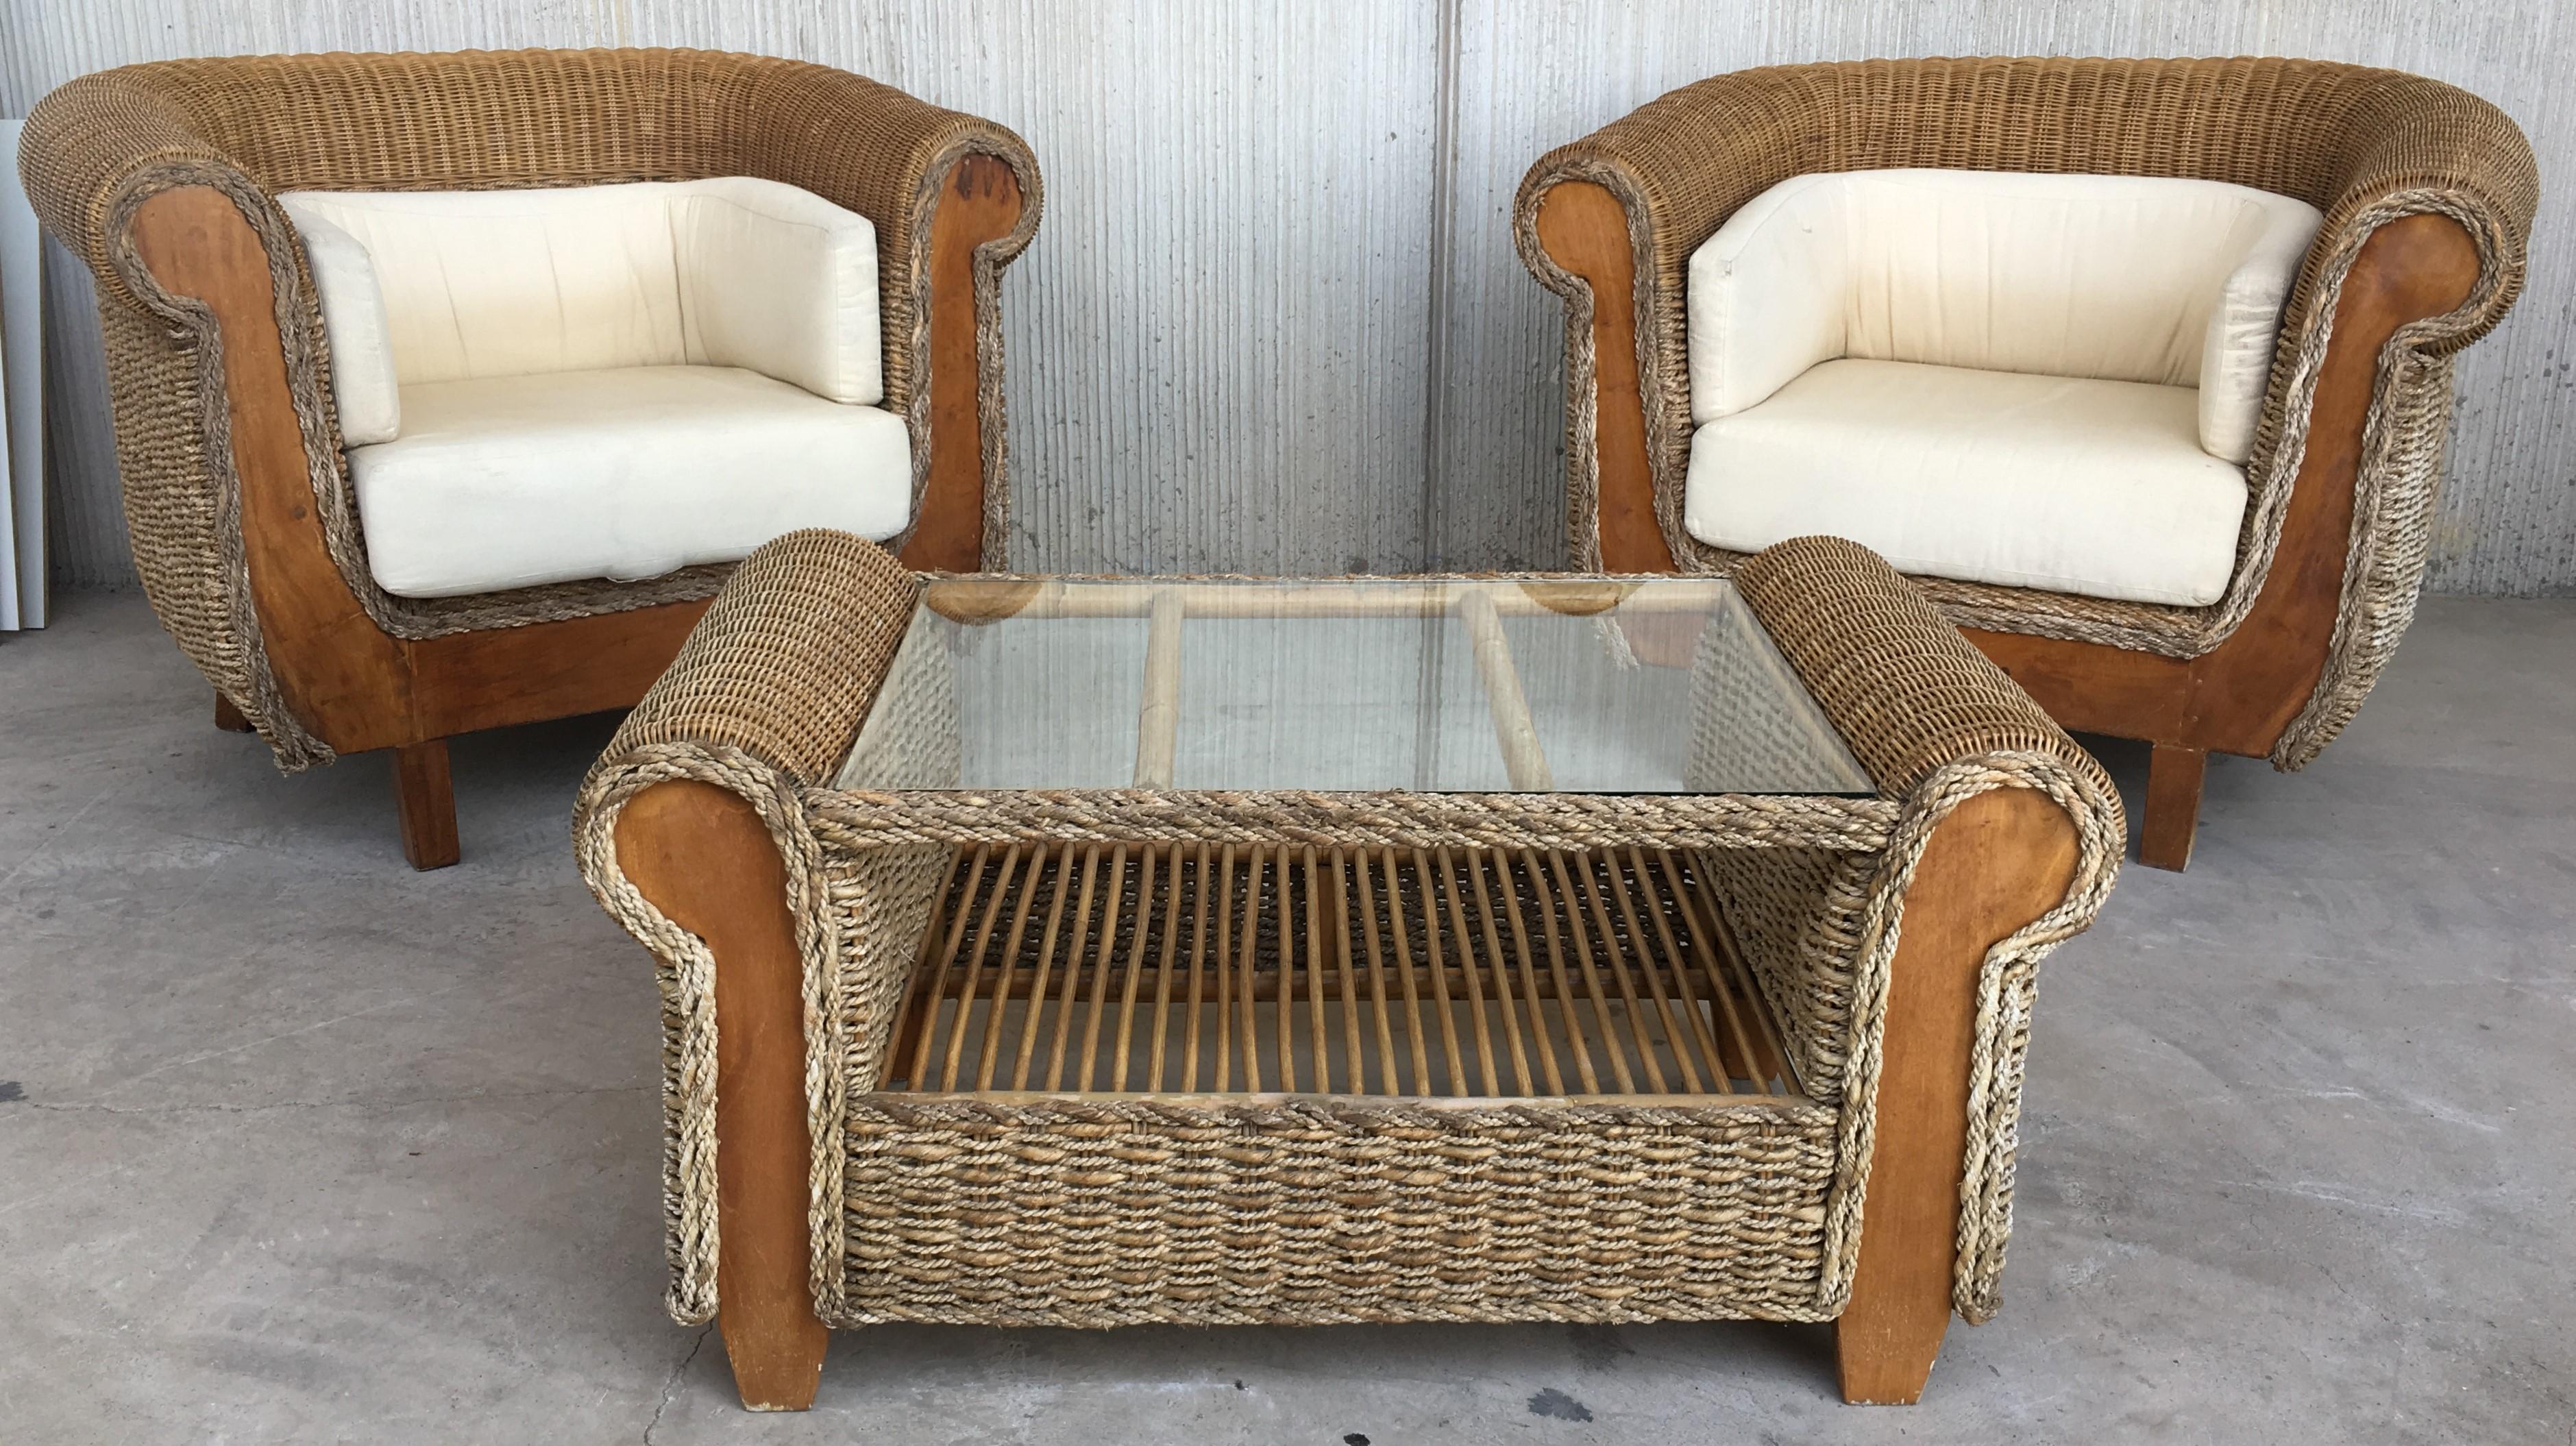 Midcentury Rattan & Wood Coffee table
Available Living room set

Armchairs measurements: 
Depth 31.88 in
Width 43.70 in
Height 31.50 in
Seat height 19.29 in.